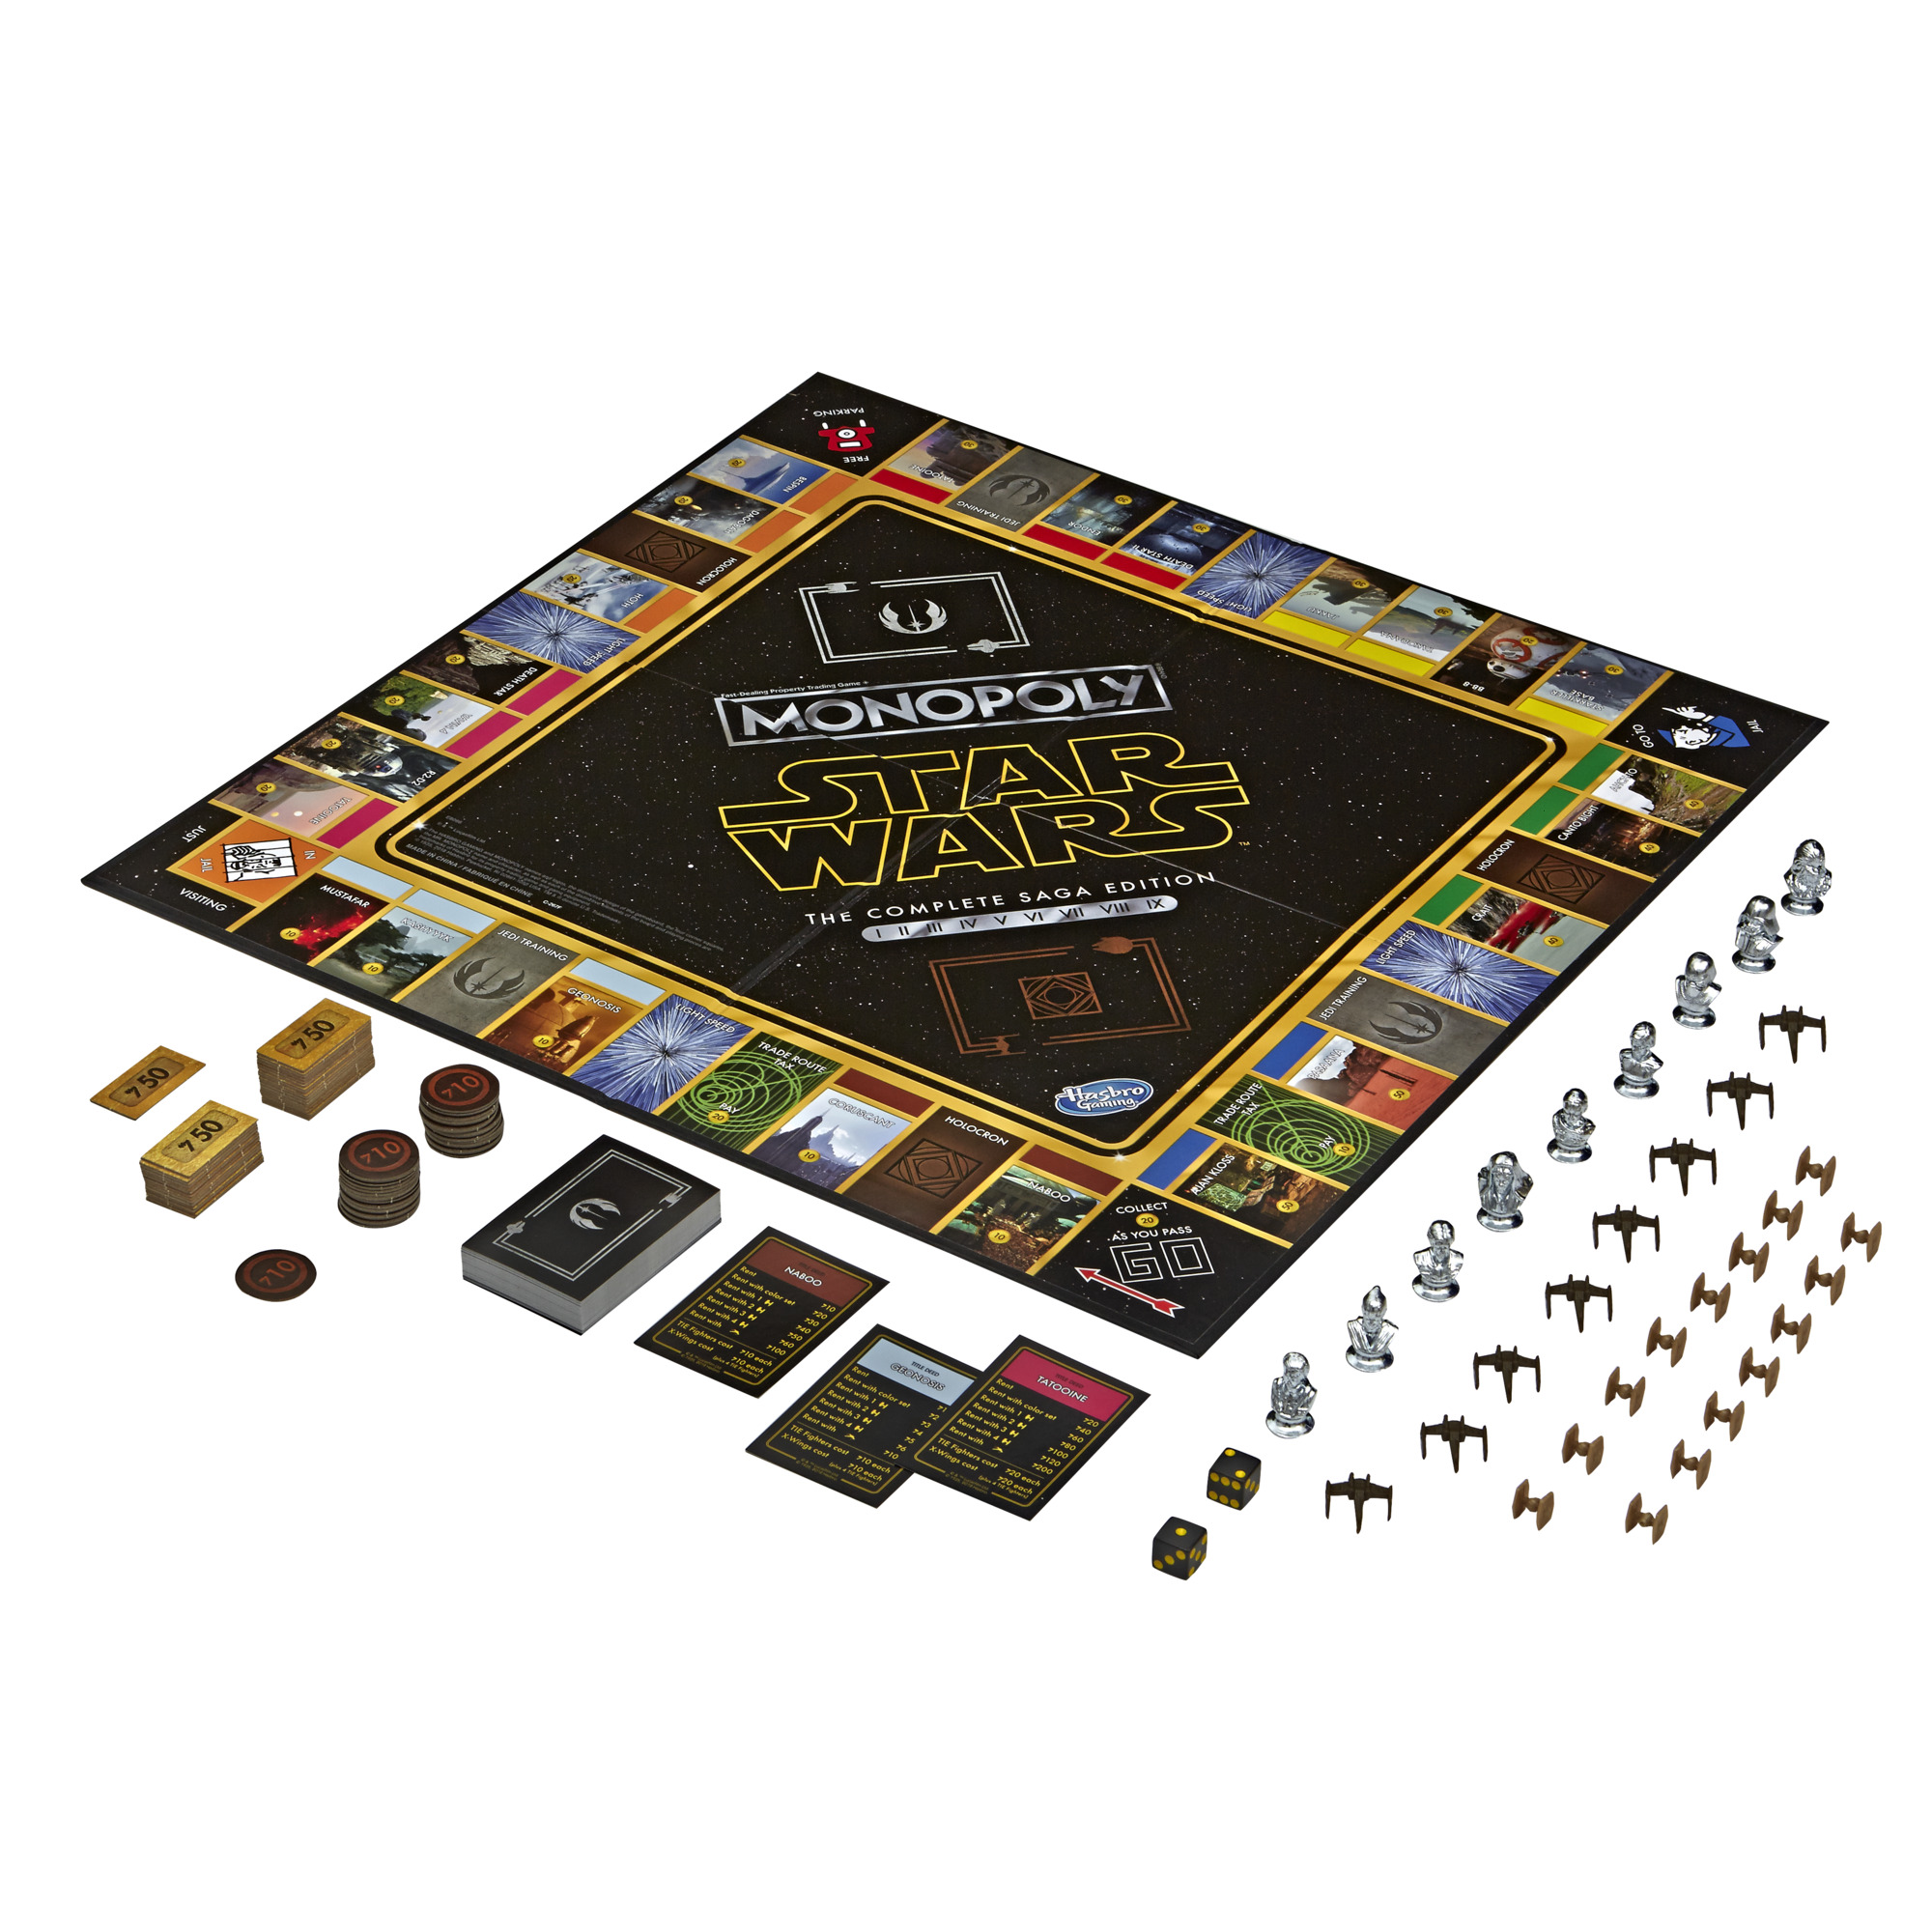 Monopoly: Star Wars The Complete Saga Edition Board Game for Kids - image 5 of 7